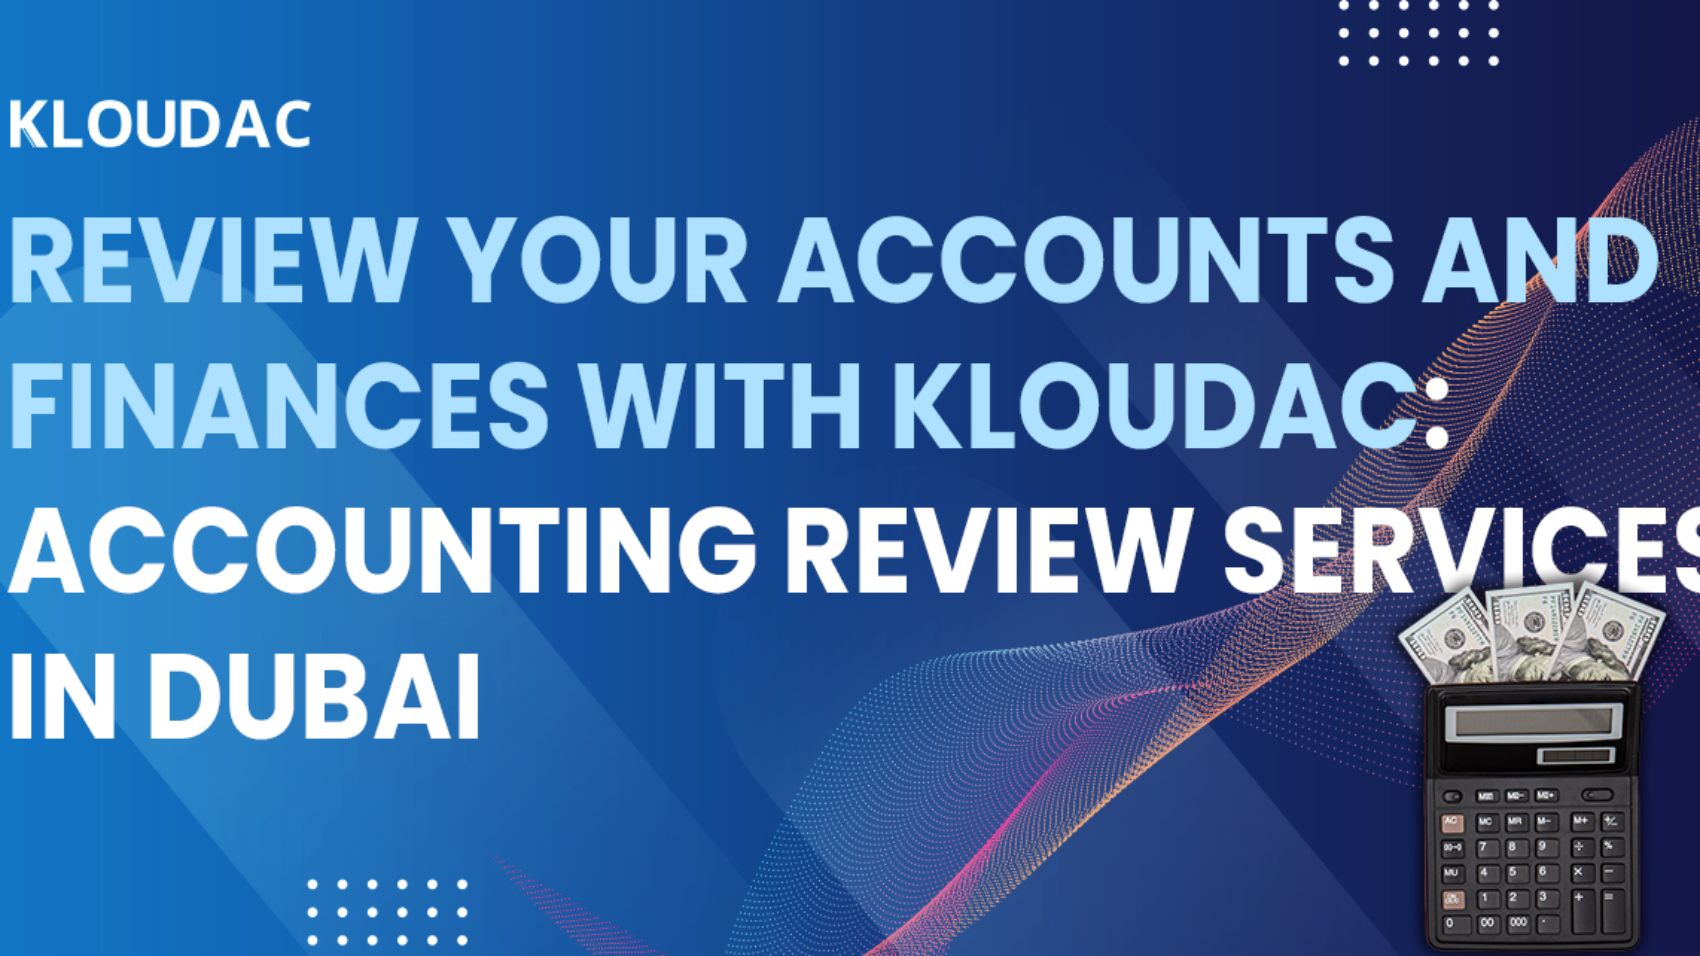 Review your accounts and finances with Kloudac: Accounting Review Services in Dubai